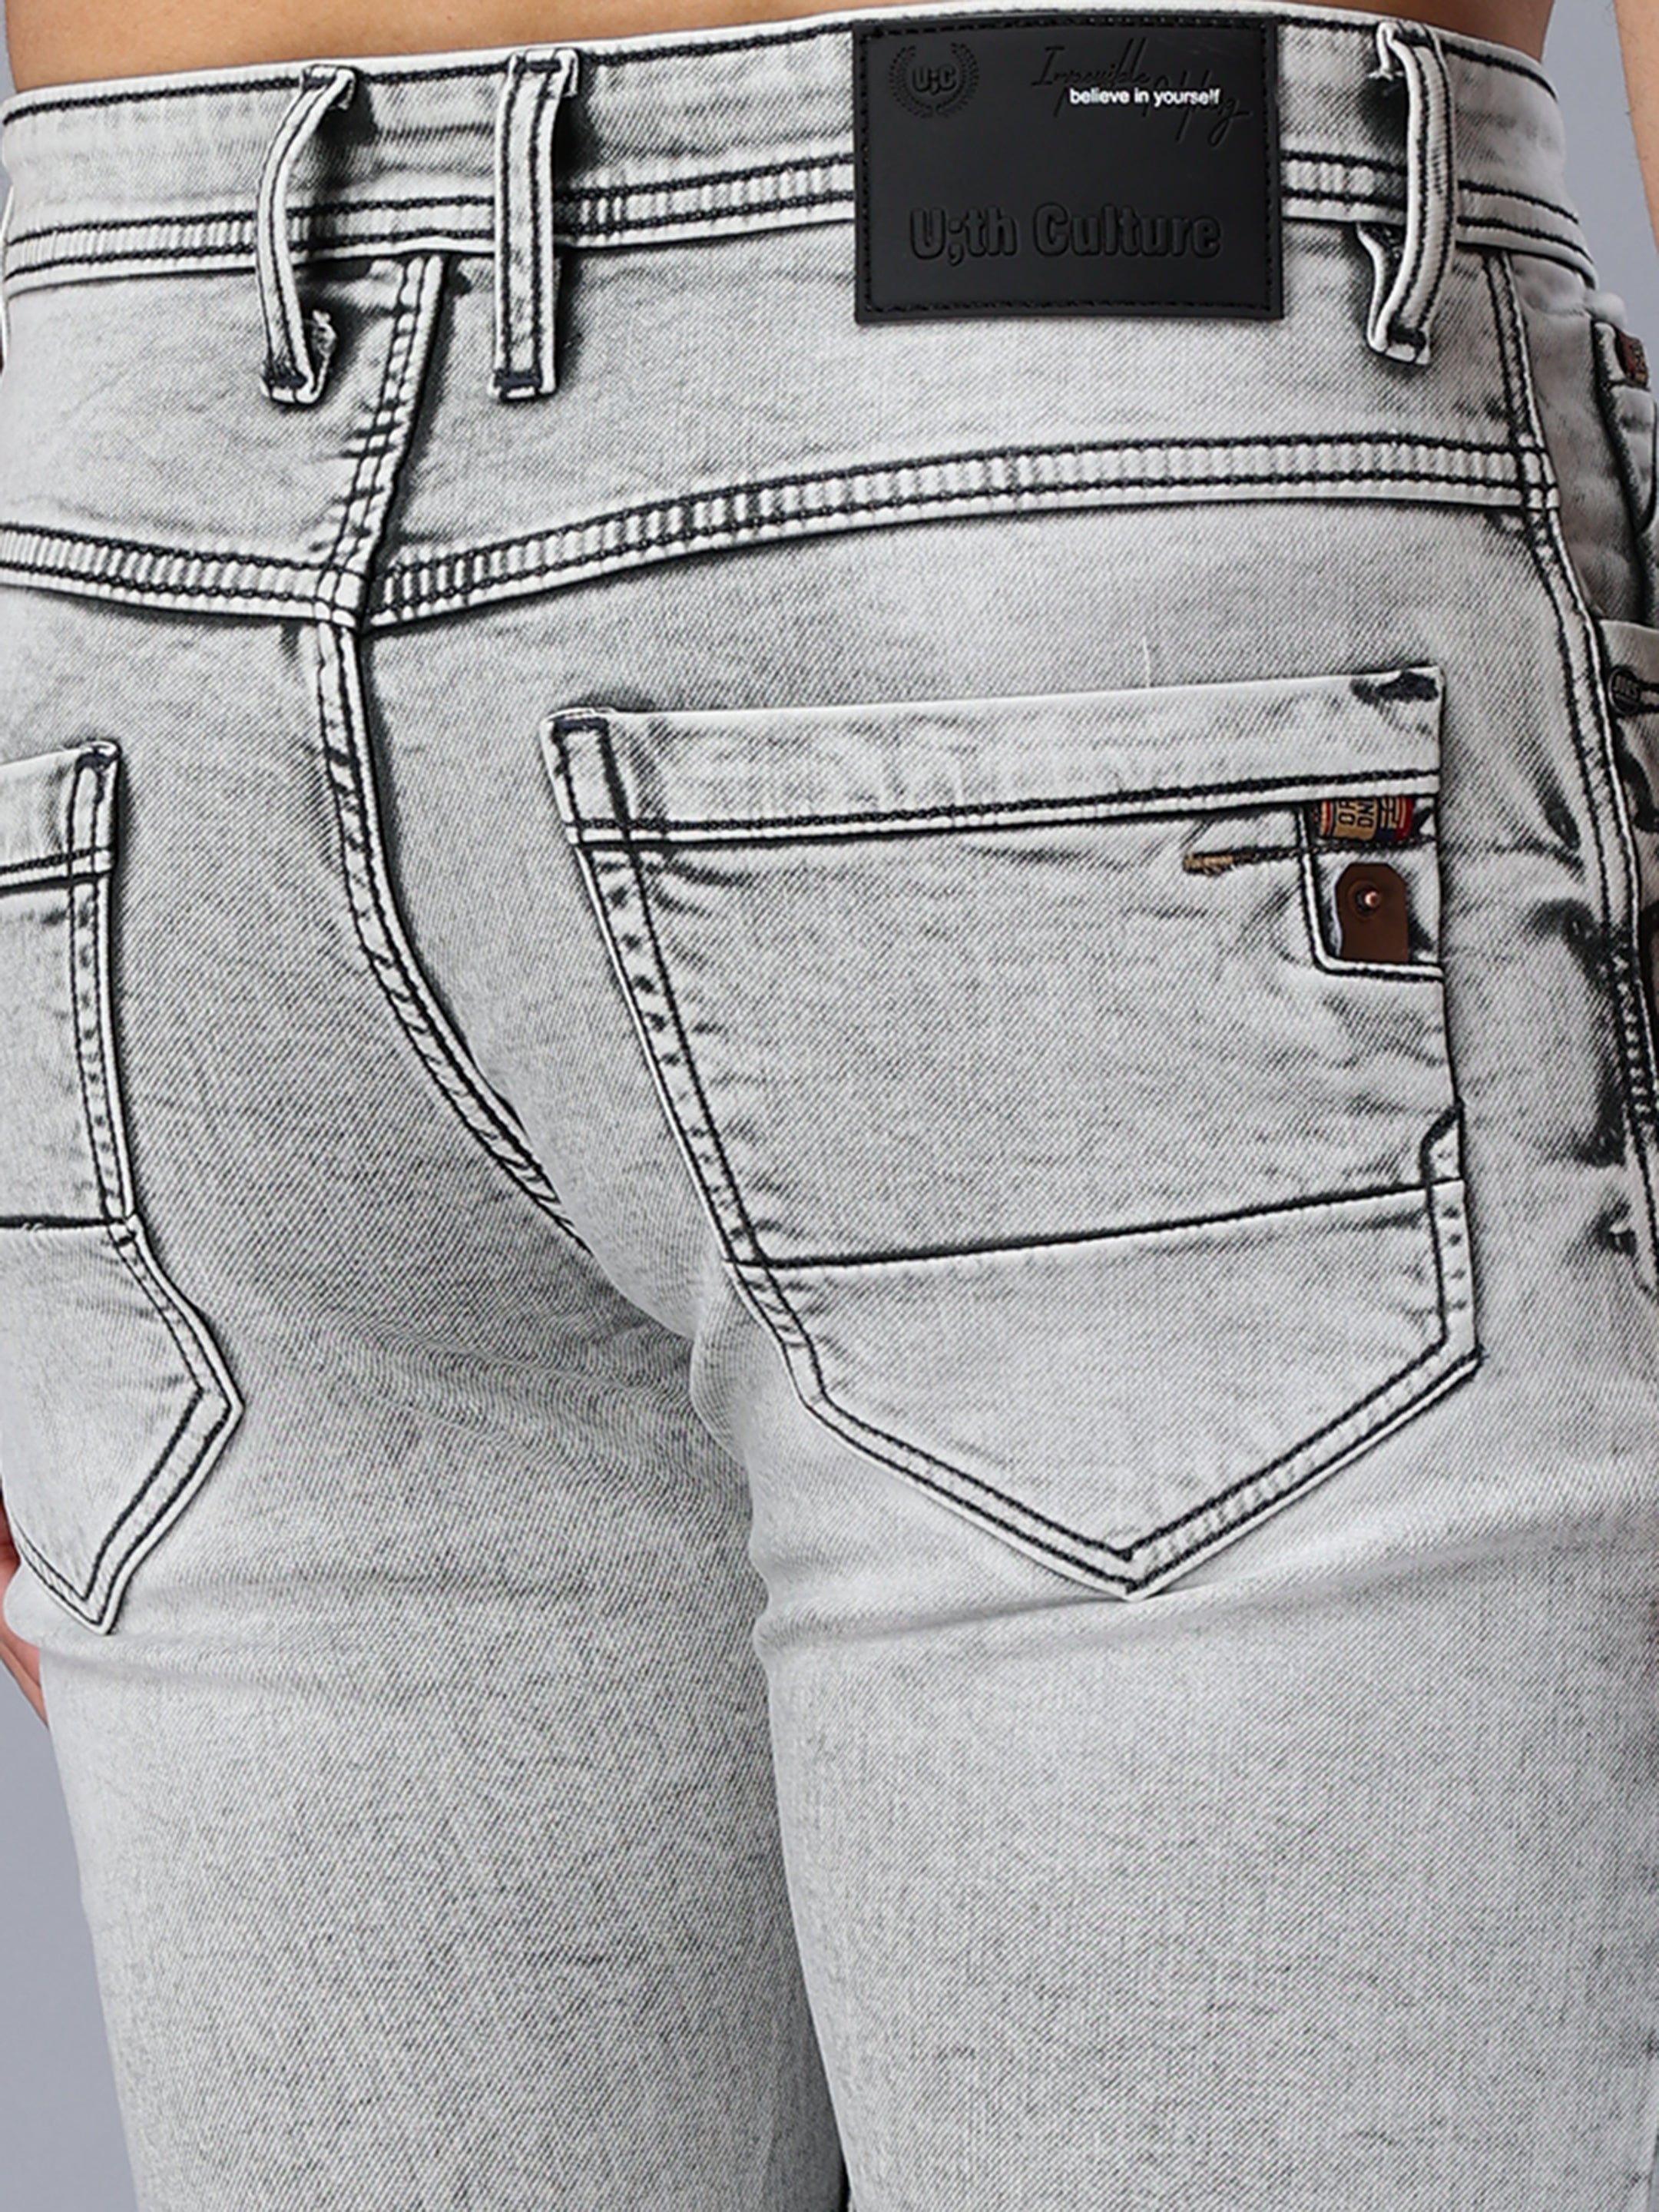 WHITE WASH GREY SKINNY FIT JEANS